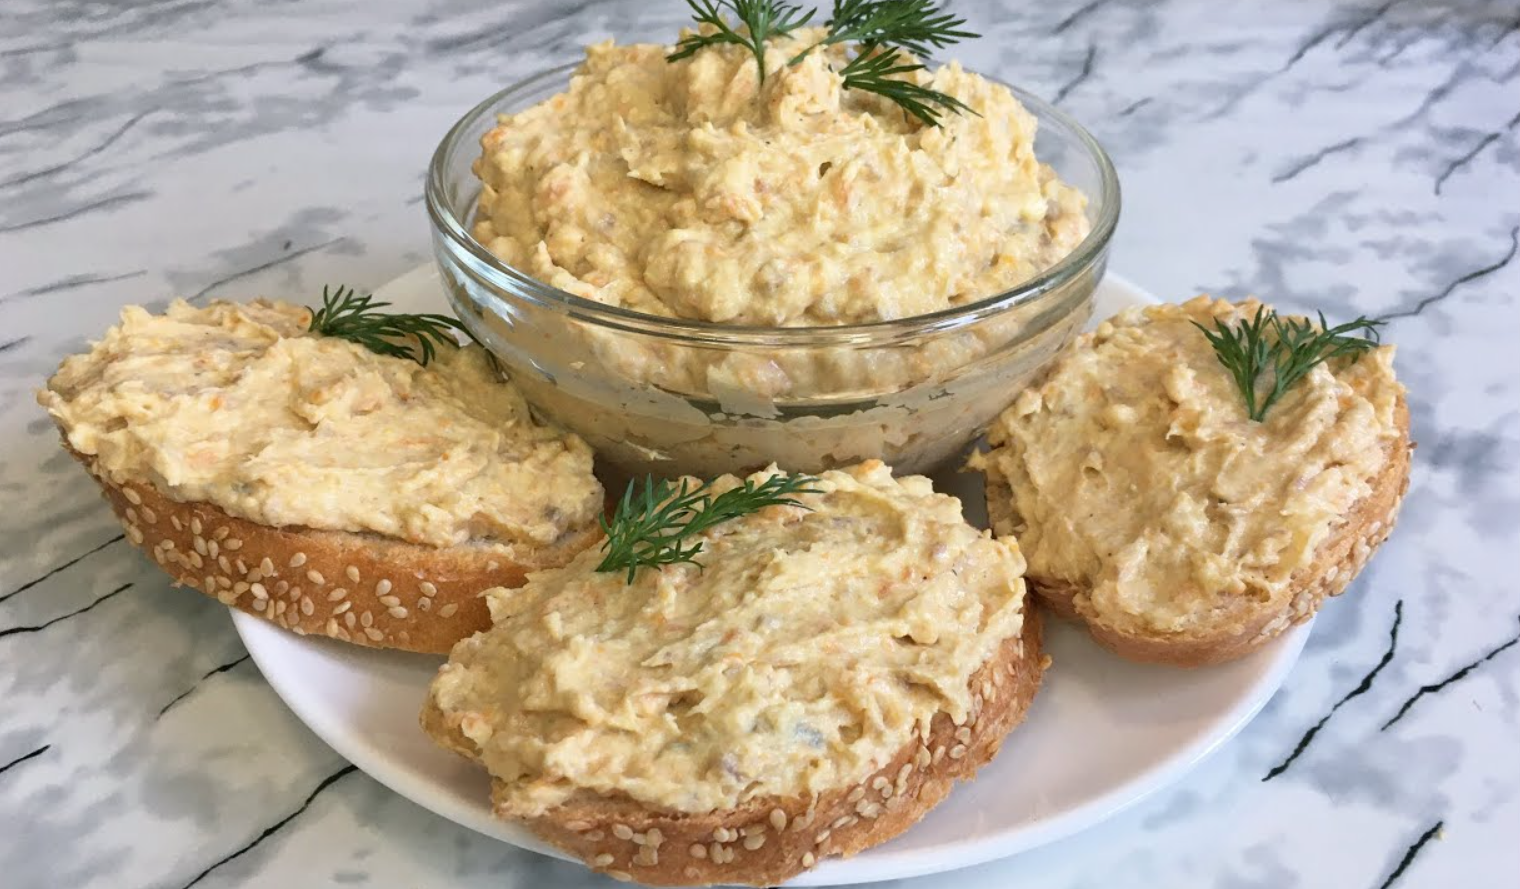 Cheese and egg spread